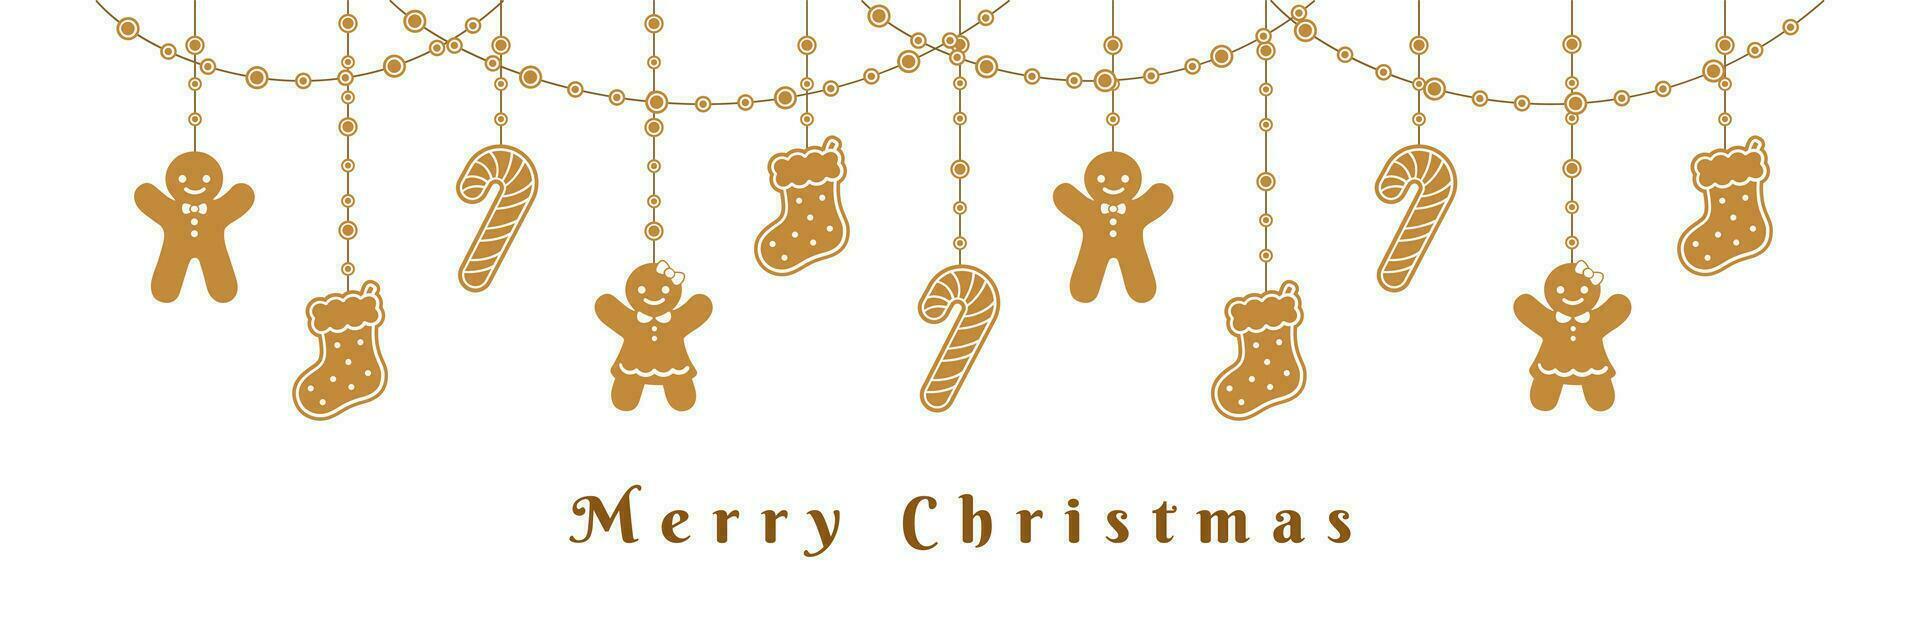 Merry Christmas Border Banner, Hanging Gingerbread Cookies Garland. Winter Holiday Season Header Decoration. Biscuits in Festive Shapes for web banner template. Vector illustration.